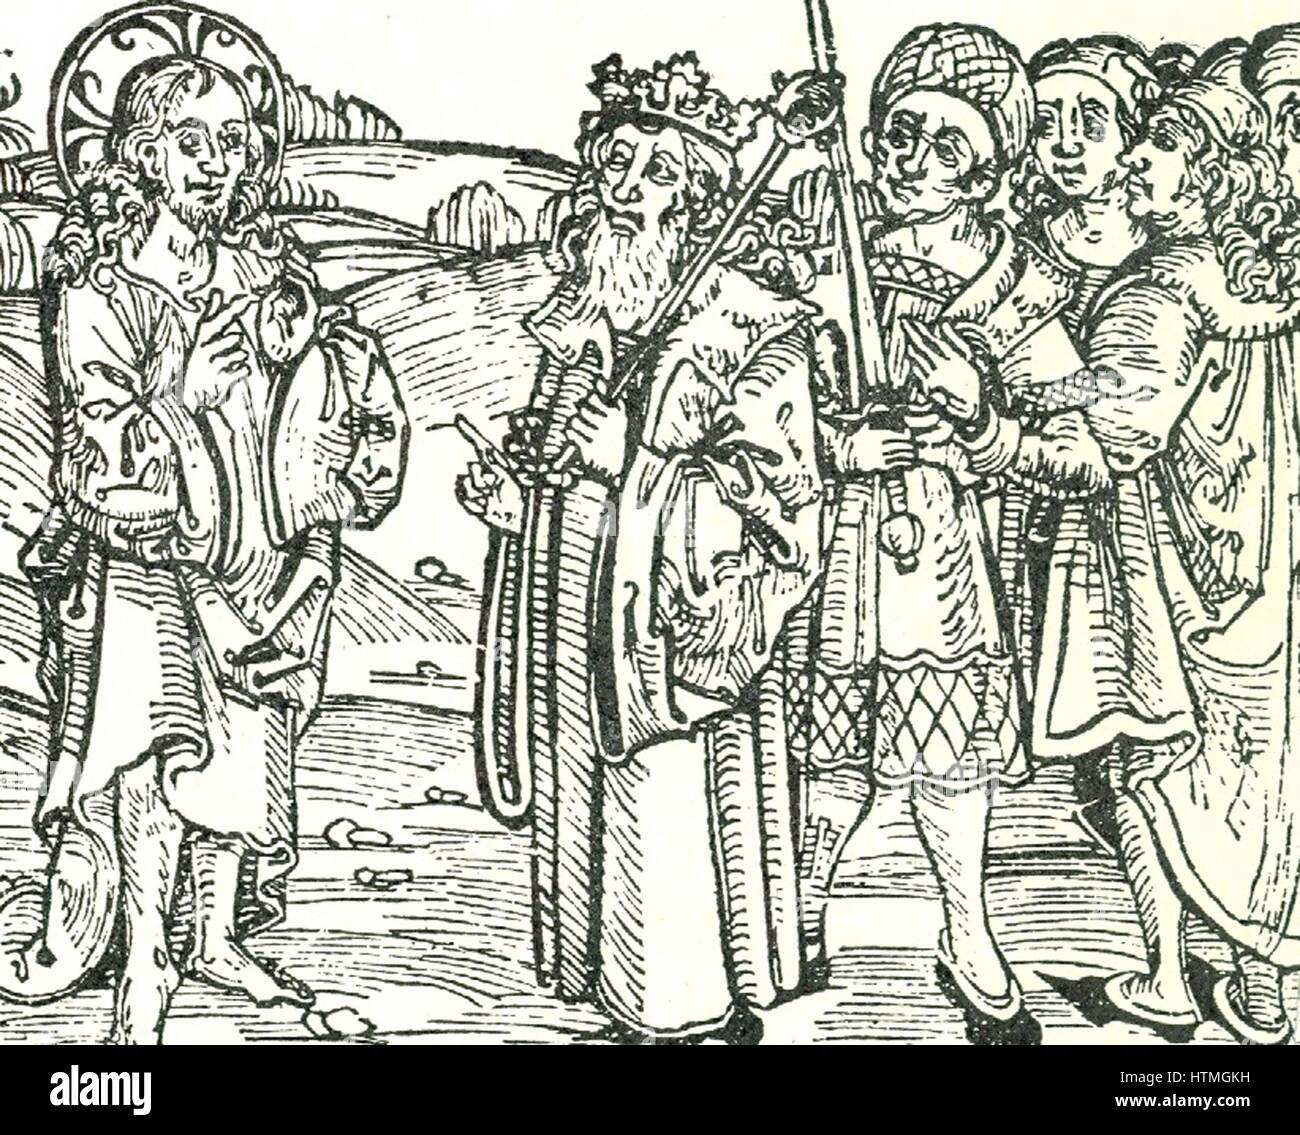 The Risen Christ appearing to the king of Spain (Ferdinand II of Aragon and Ferdinand V of Castile 1452-1516). Woodcut from 1497 pamphlet containing a German translation of Columbus's letter to Luis de Santangel, the Spanish royal Treasurer, announcig his discovery of America. Stock Photo